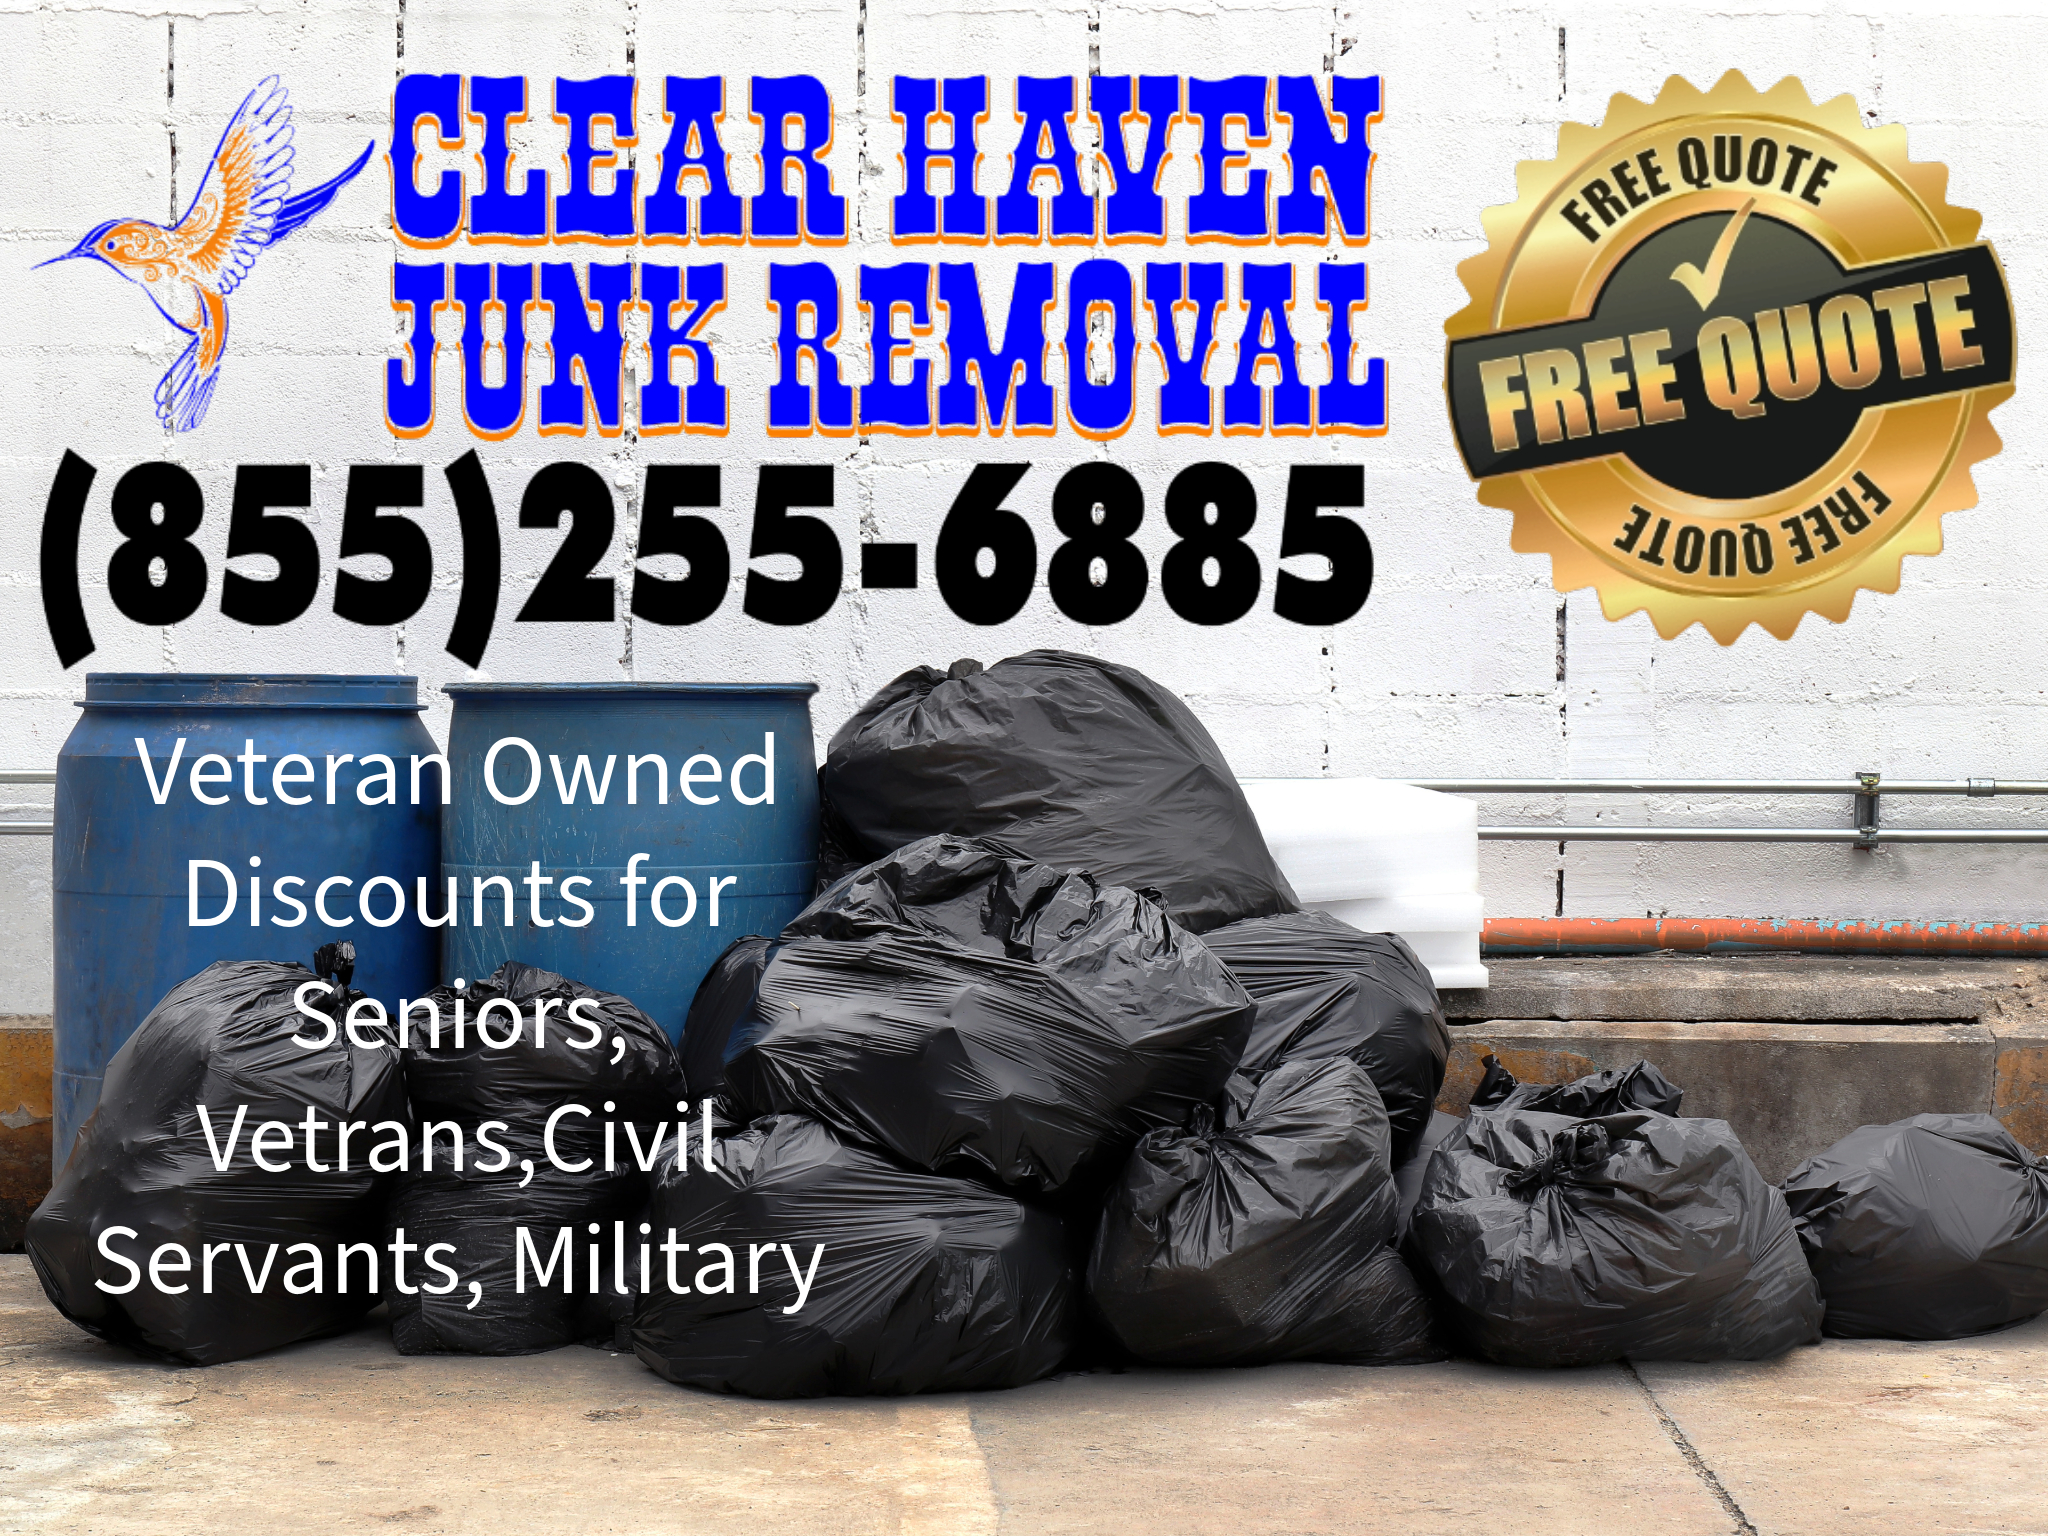 In addition, we offer Appliance Removal, BBQ Grill Haul Away, Television & Electronics Disposal, Shed Removal, Construction Waste Removal, Alleyway Clean Up, Yard Waste Removal, Dumpster Rental Alternative, Dumpster Enclosure Clean Up, and much more. Choose us for your comprehensive junk removal needs in Phoenix.